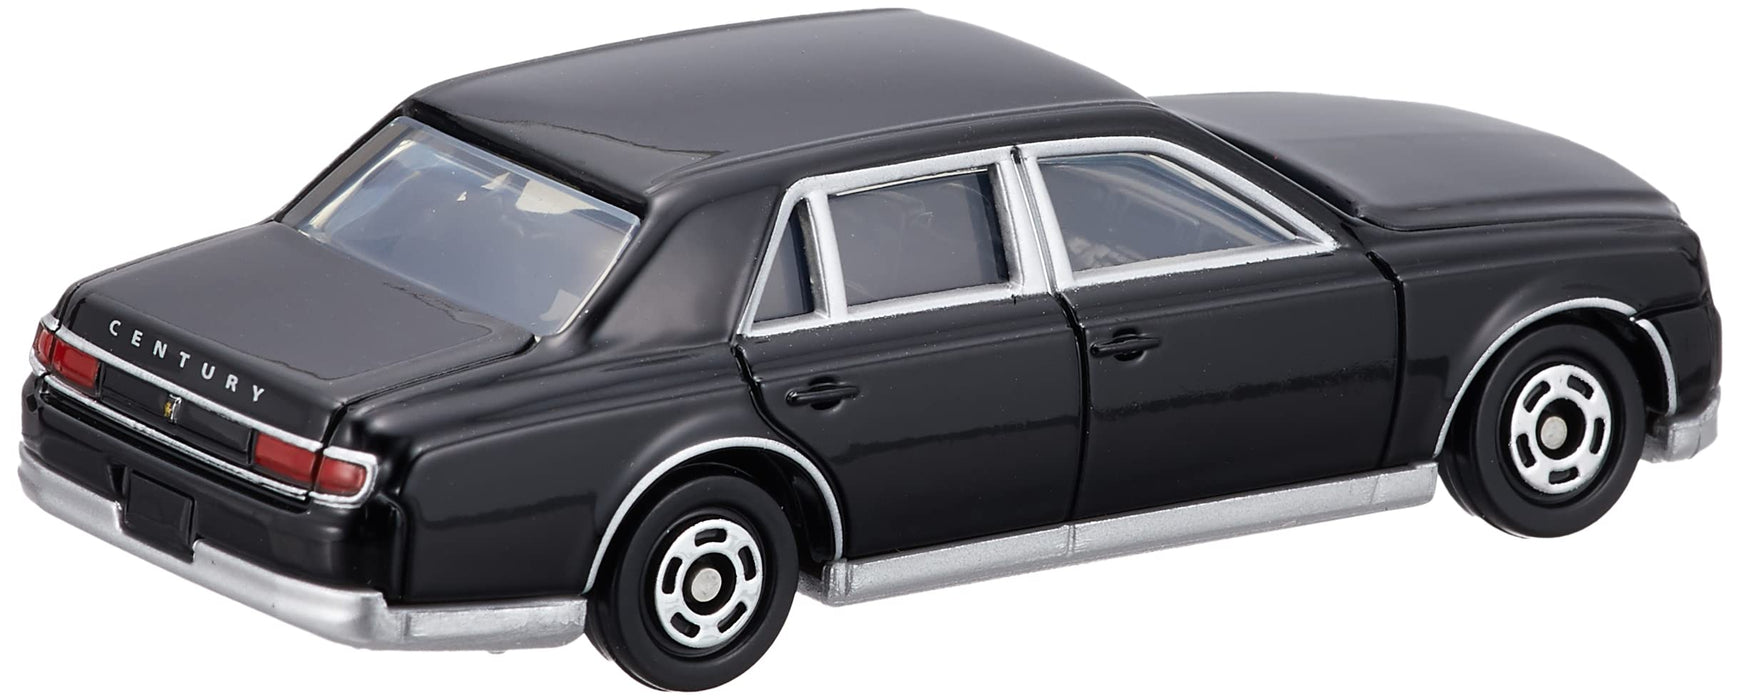 Takara Tomy No.114 Tomica Toyota Century Mini Car Toy for Ages 3+